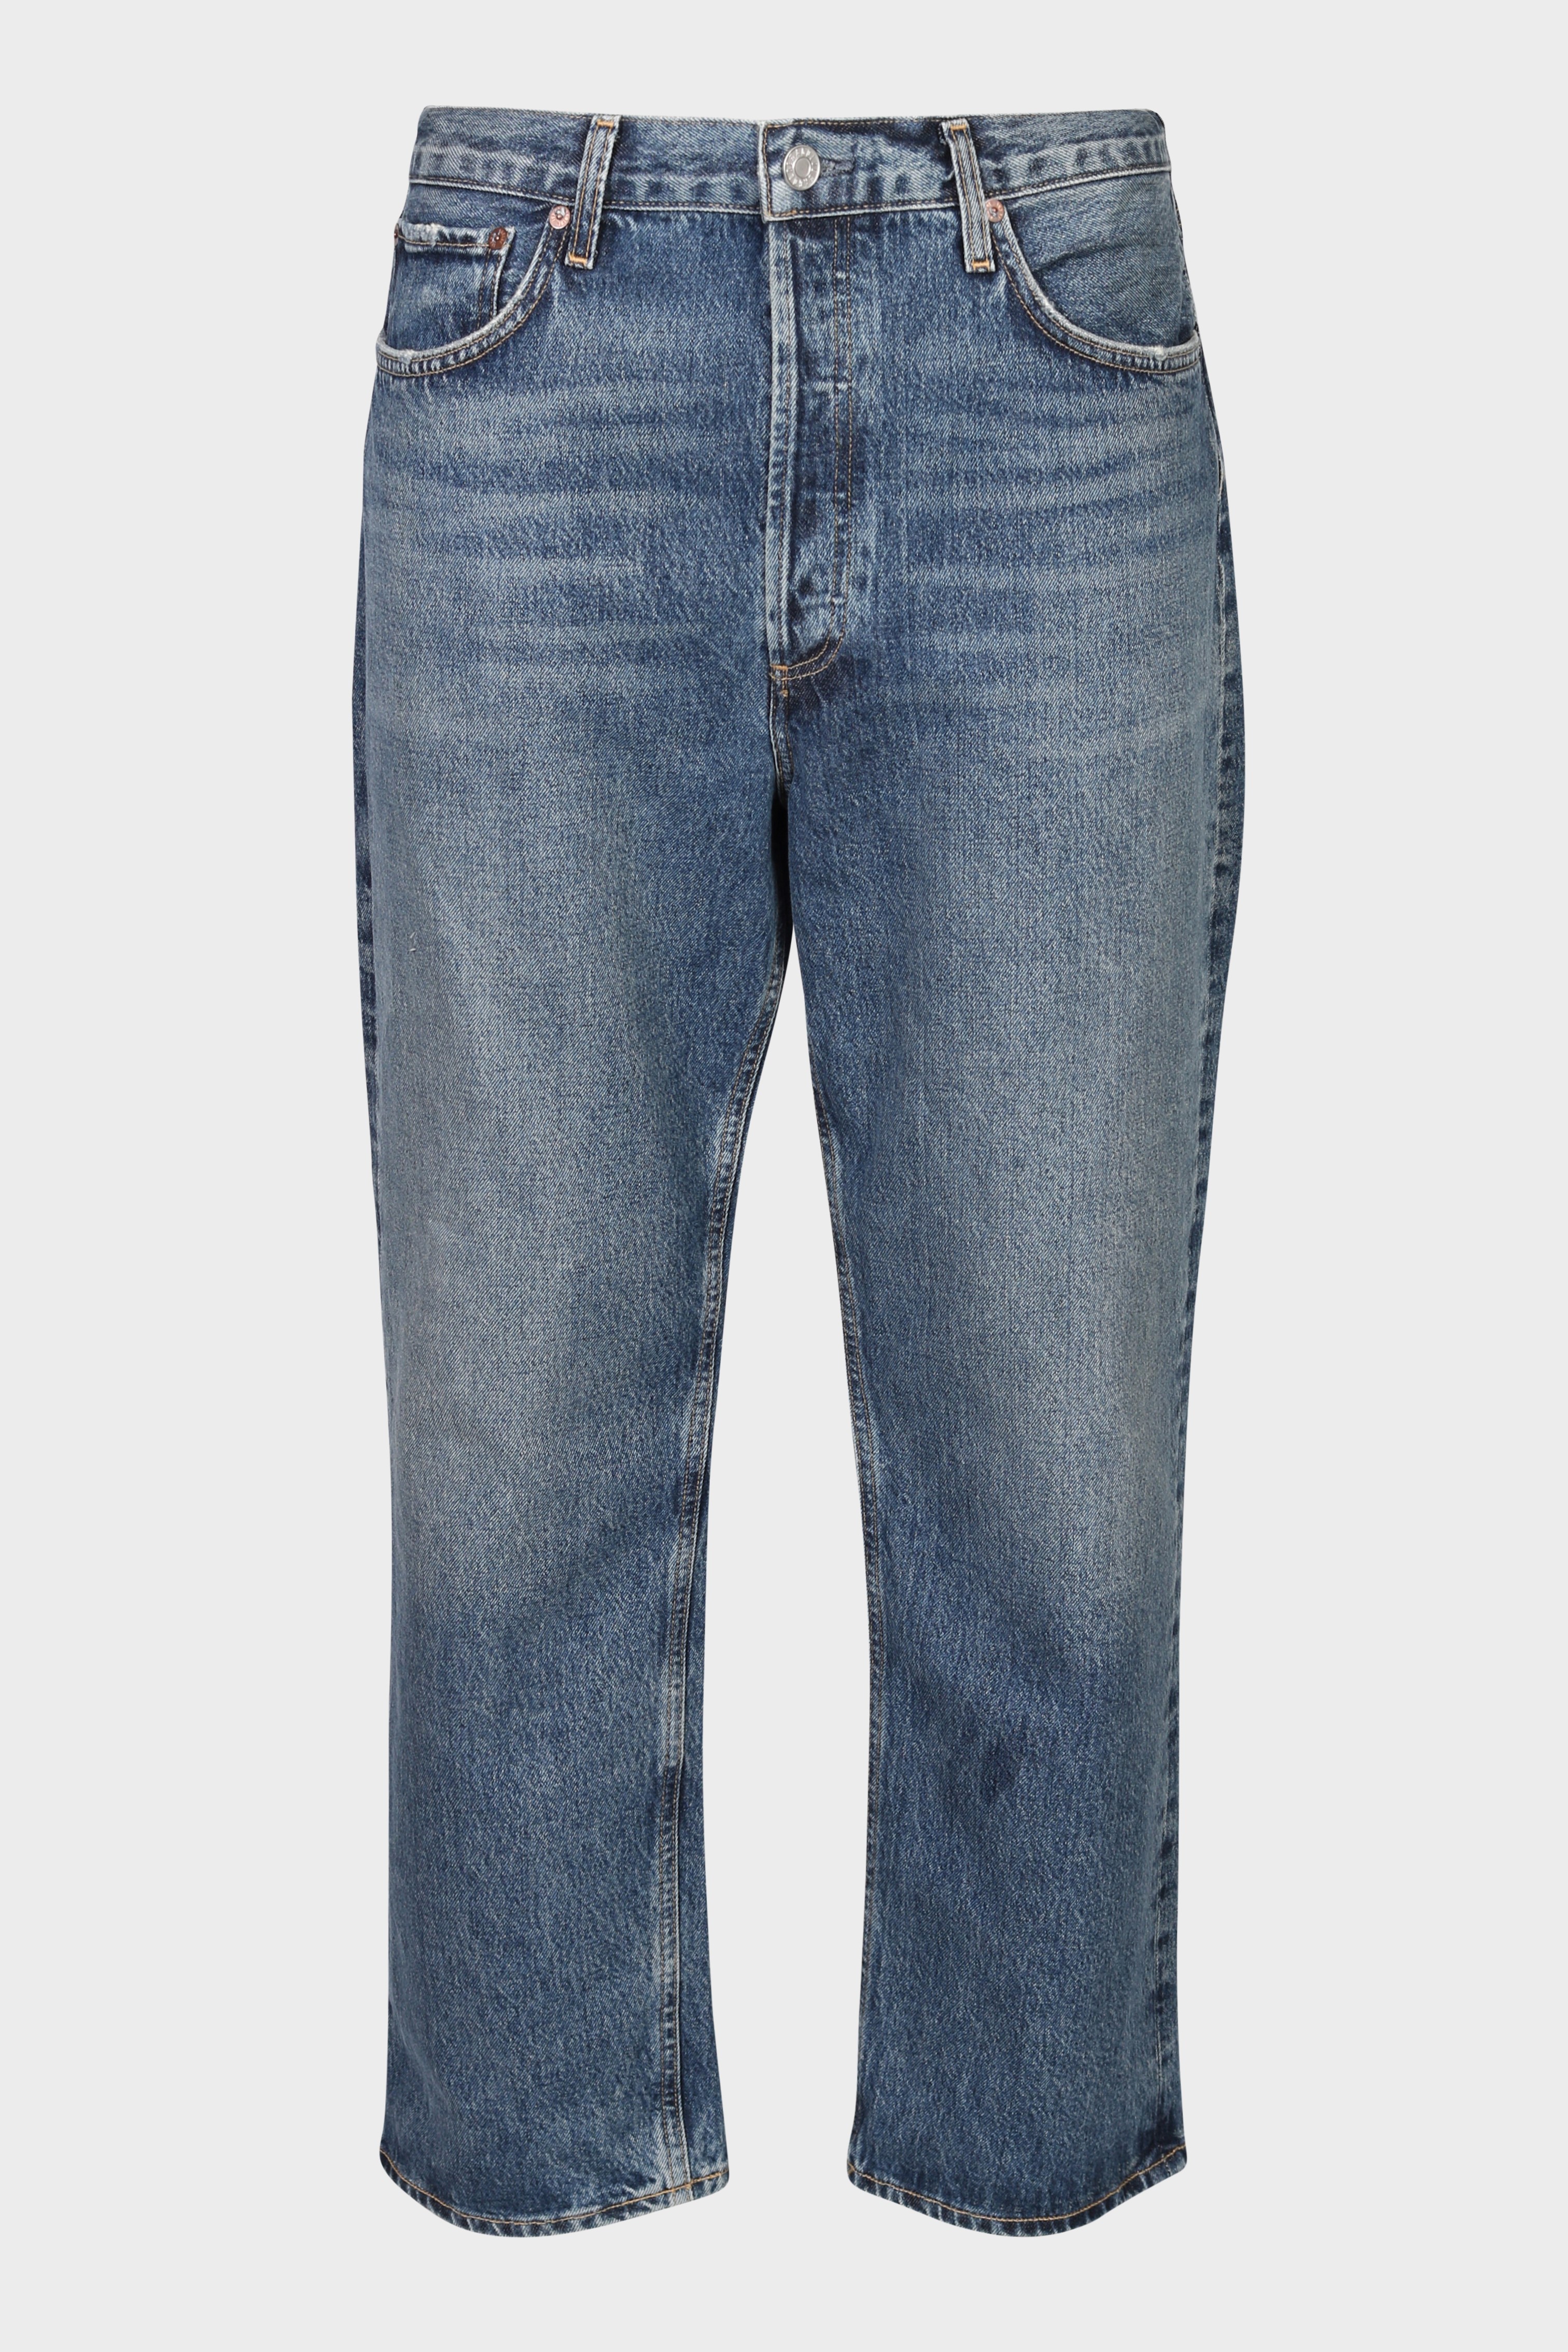 AGOLDE 90's Jeans in Mid Blue Washed